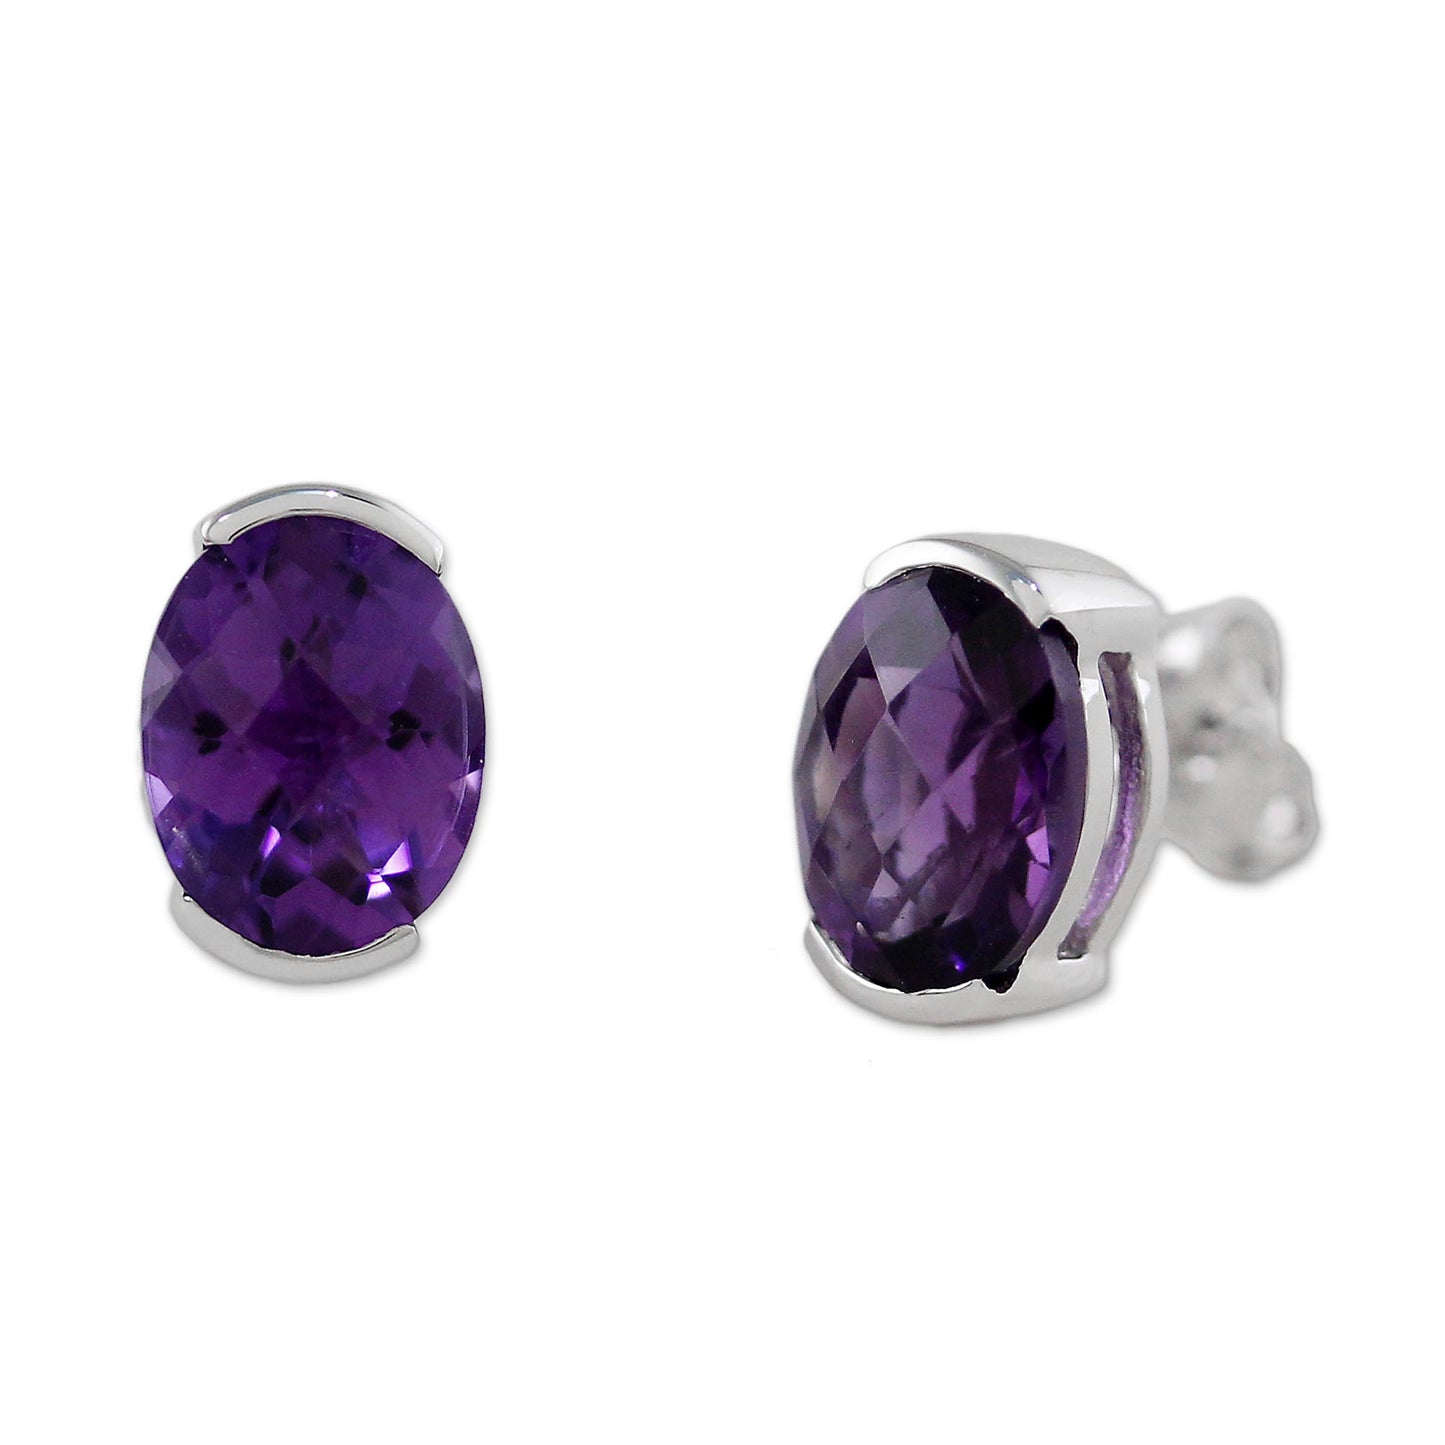 Precious Plum Amethyst and Sterling Silver Stud Earrings from Thailand